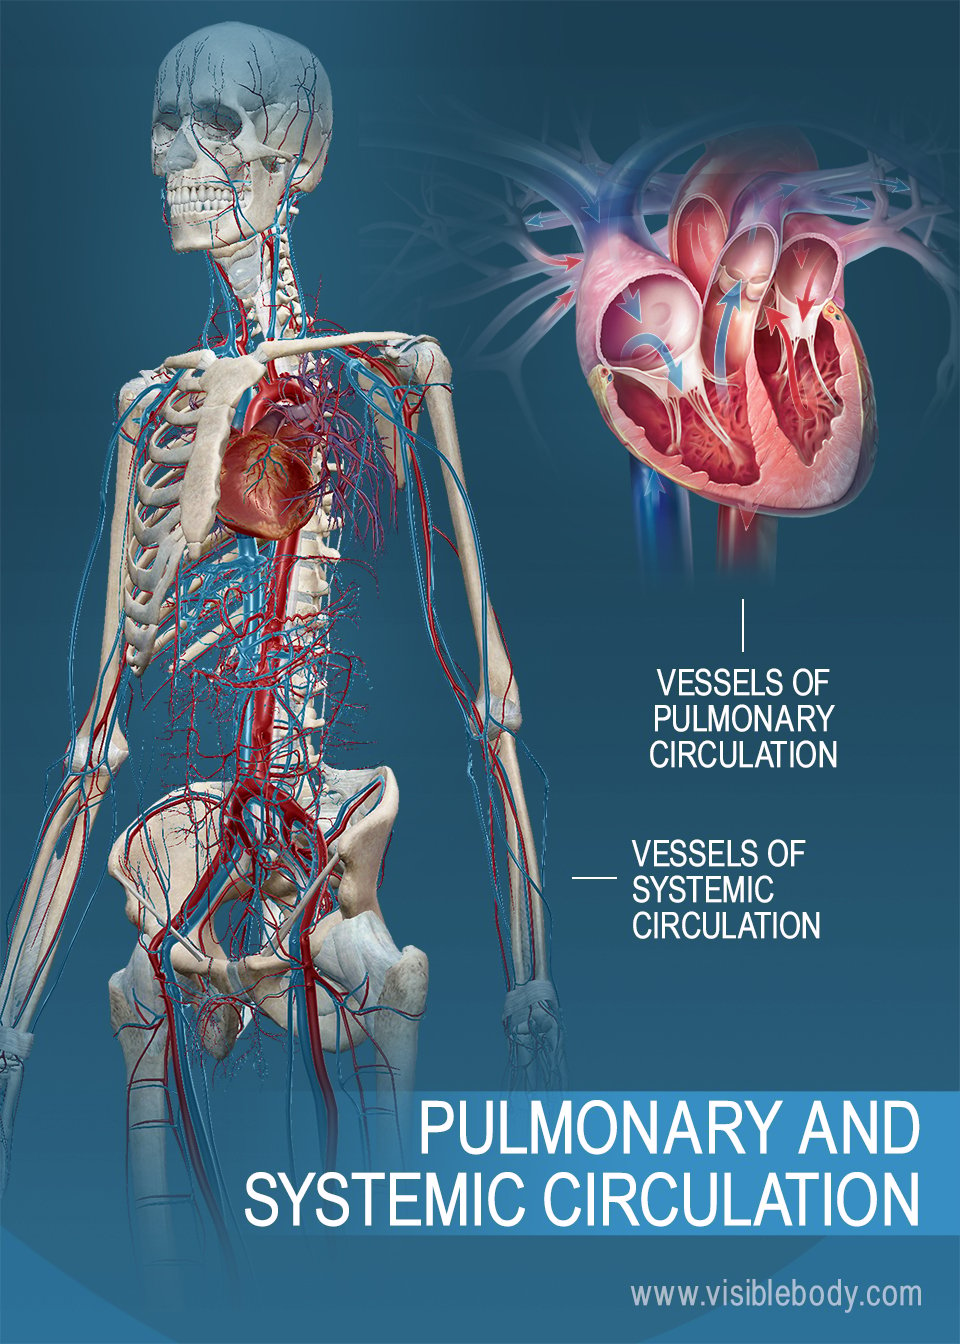 Vessels of both systemic and pulmonary circulation